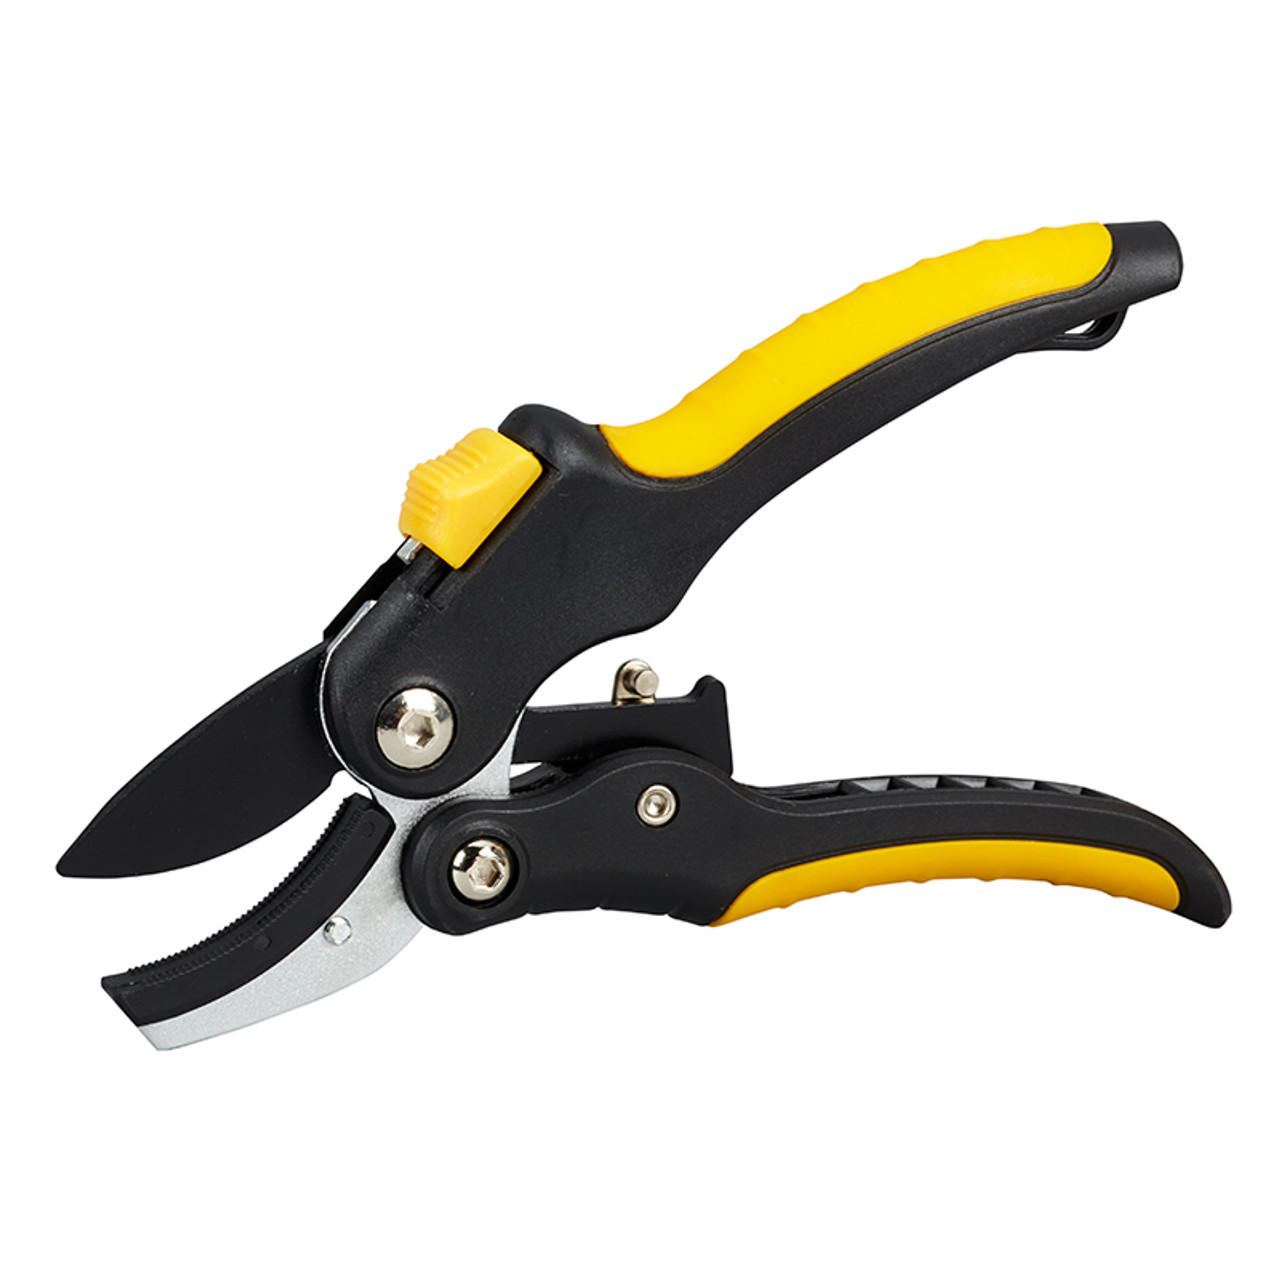 Anvil Pruner with Molded Grip